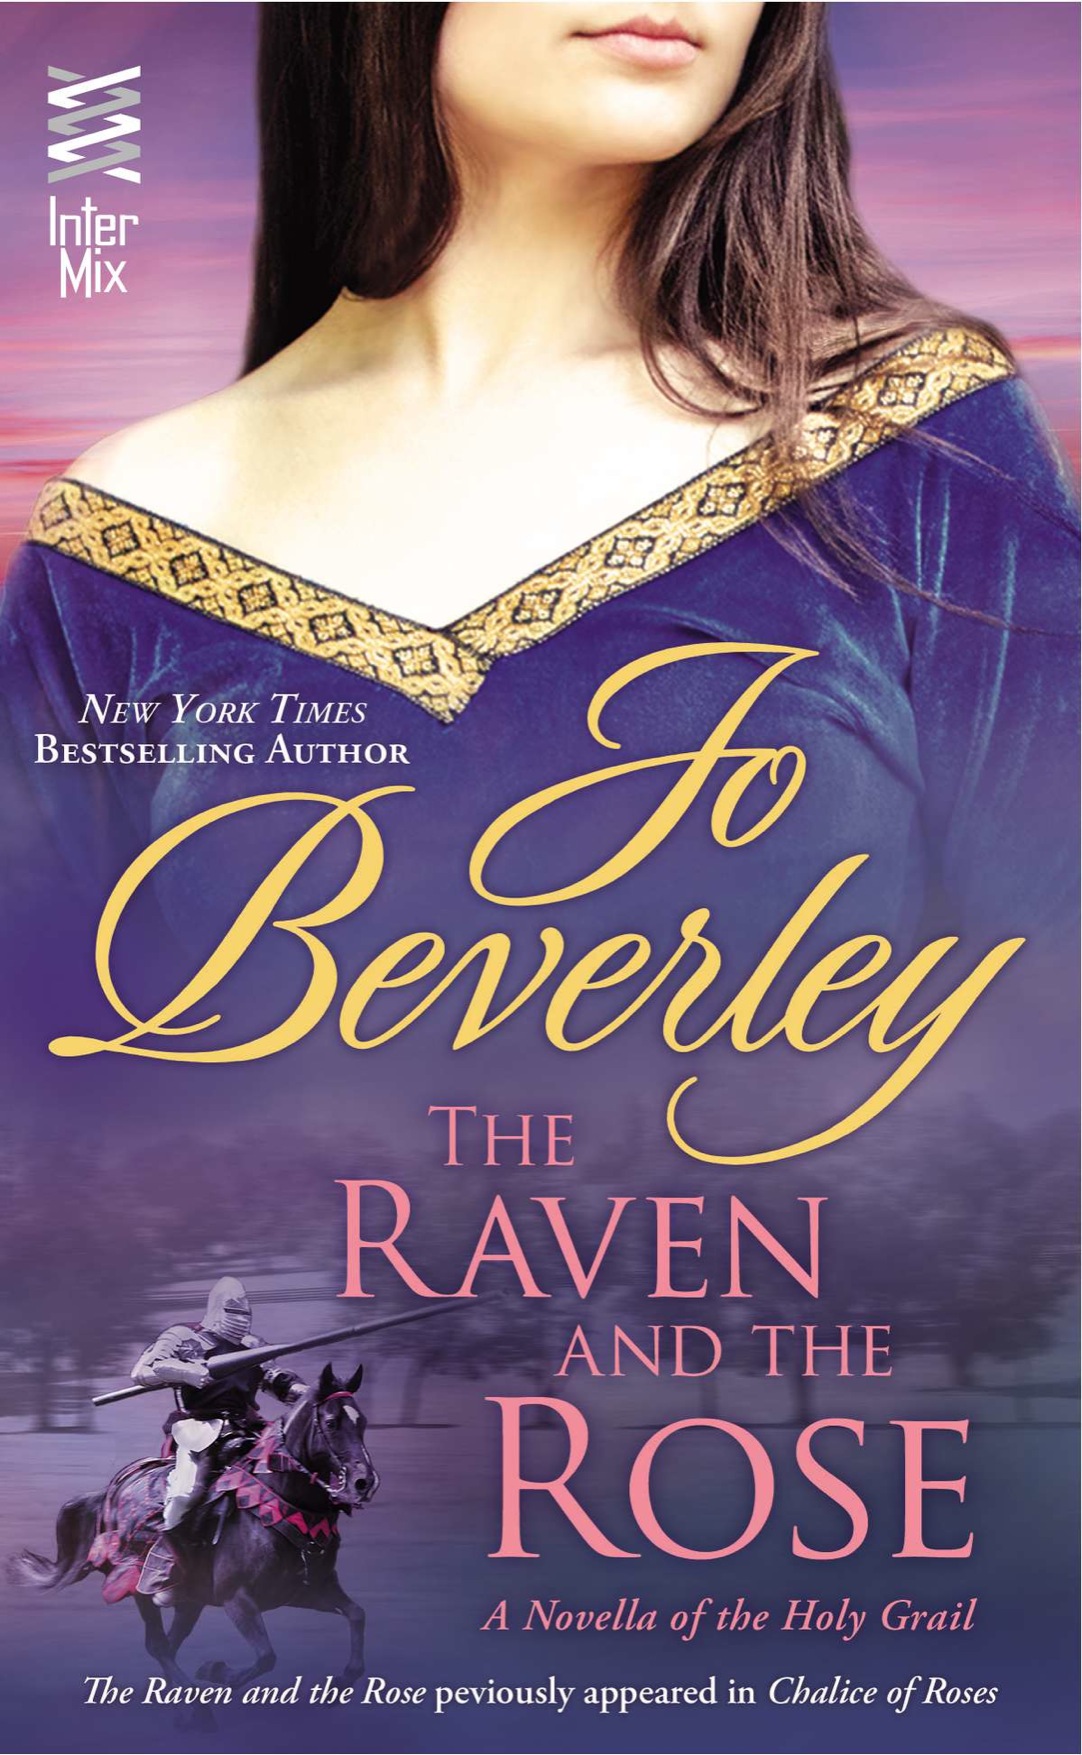 The Raven and the Rose (2014) by Jo Beverley